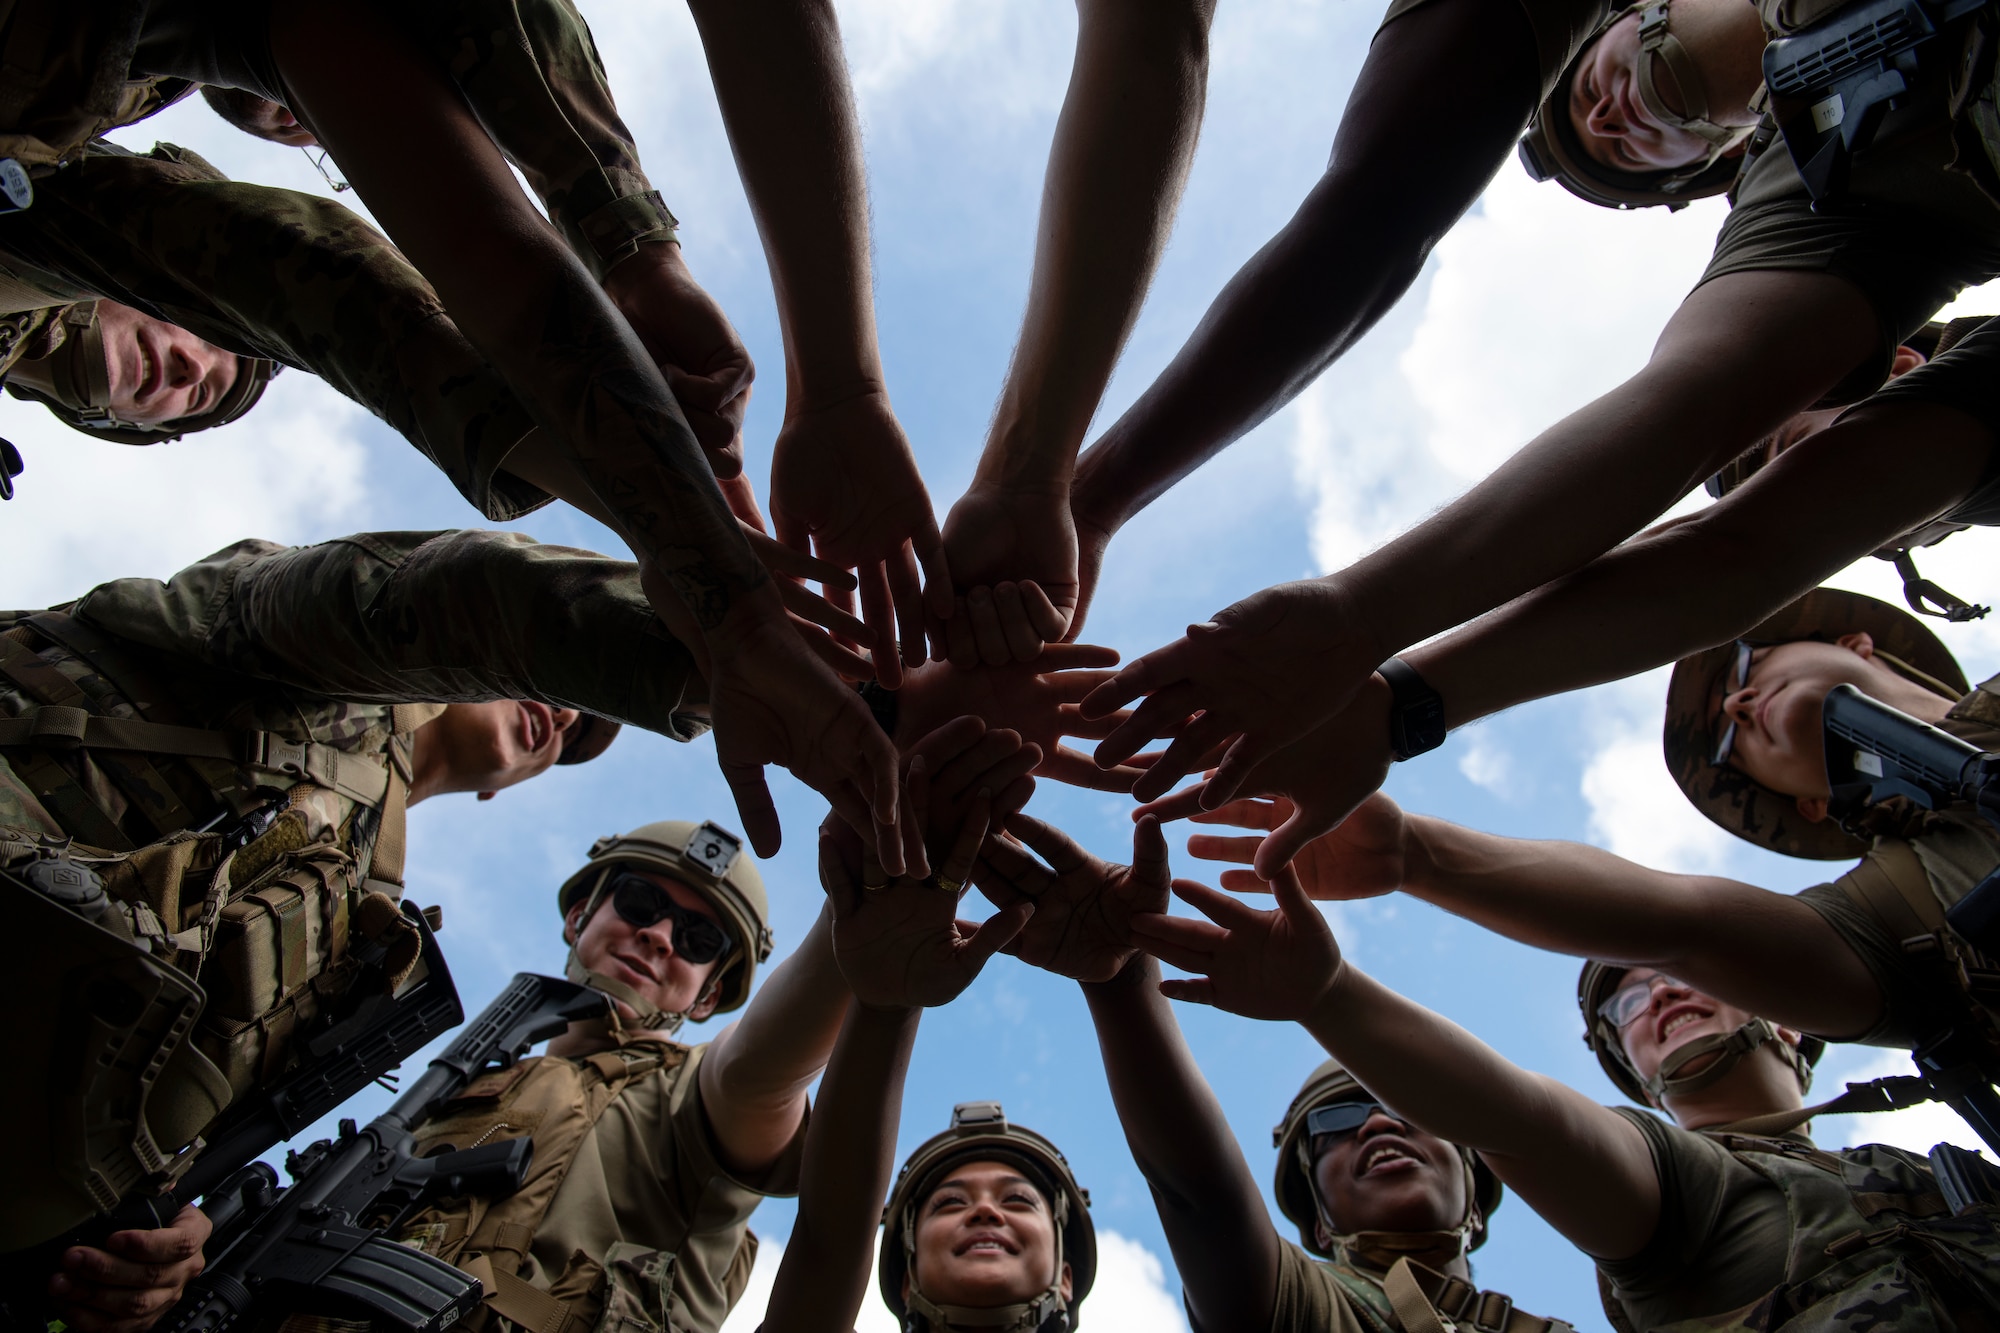 U.S. Air Force Airmen assigned to the 18th Security Forces Squadron huddle before a field training exercise at Kadena Air Base, Japan, April 27, 2022. The training is an annual requirement for all SFS members, covering traveling techniques, movement formations, and using cover and concealment to advance on or defend objectives. (U.S. Air Force photo by Senior Airman Jessi Monte)